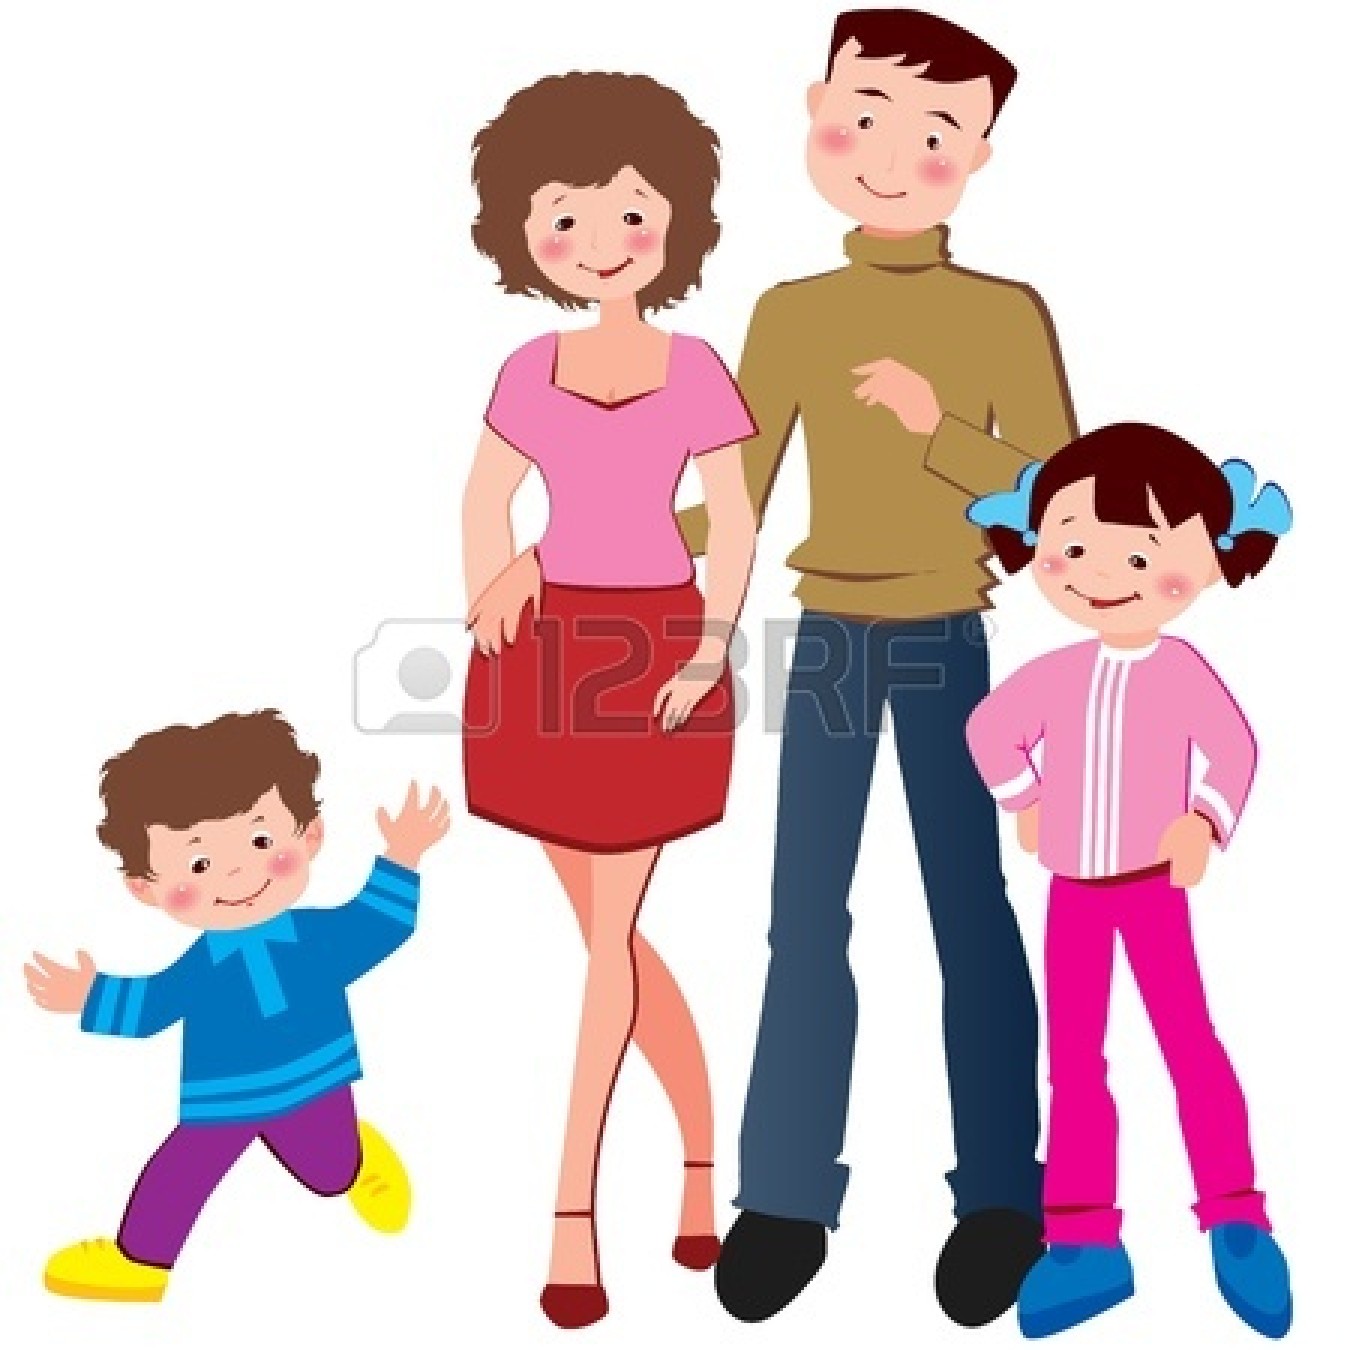 Nuclear family clipart black and white